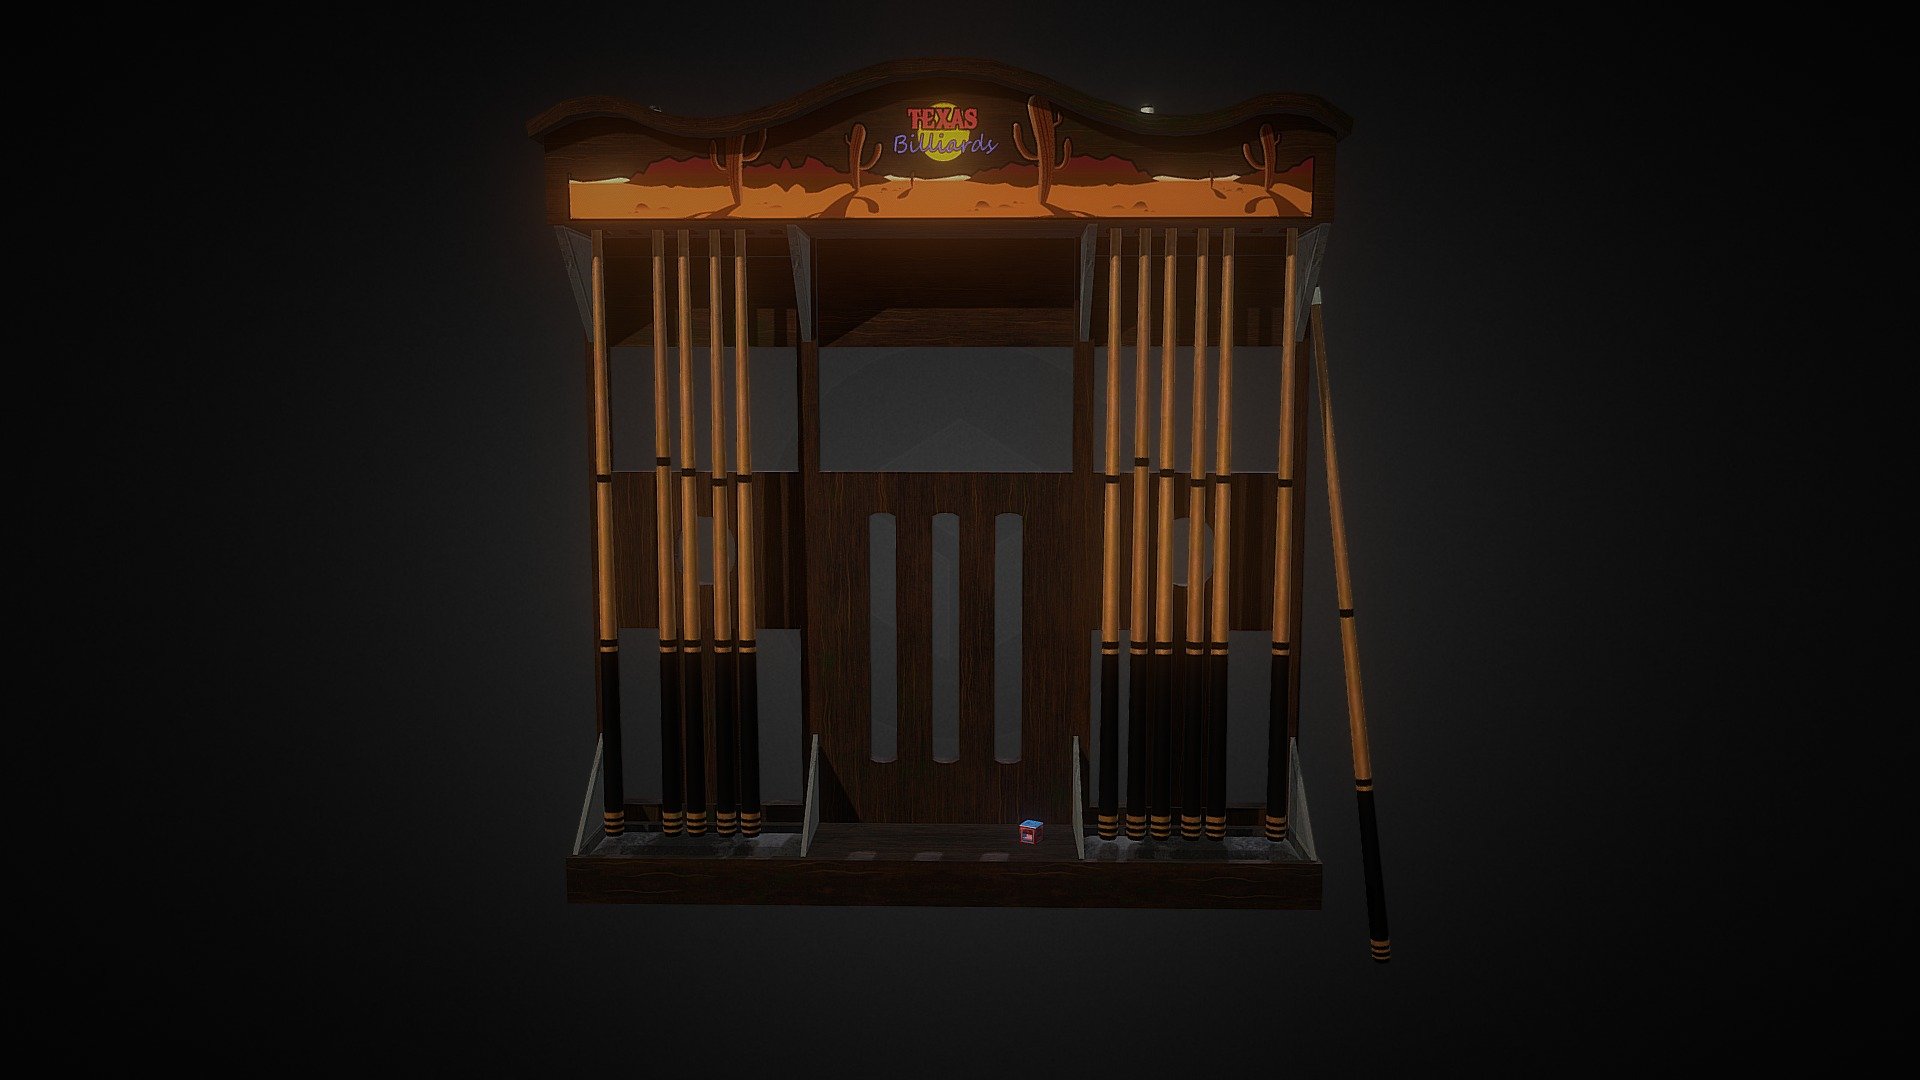 IndoorGames billiard accessories. 
See also: https://sketchfab.com/models/5d7d0dced1f64ae7bfddb7e439465eb2 - Billiard StickHolder - Buy Royalty Free 3D model by Enrique Soriano (@lkikelodeon) 3d model